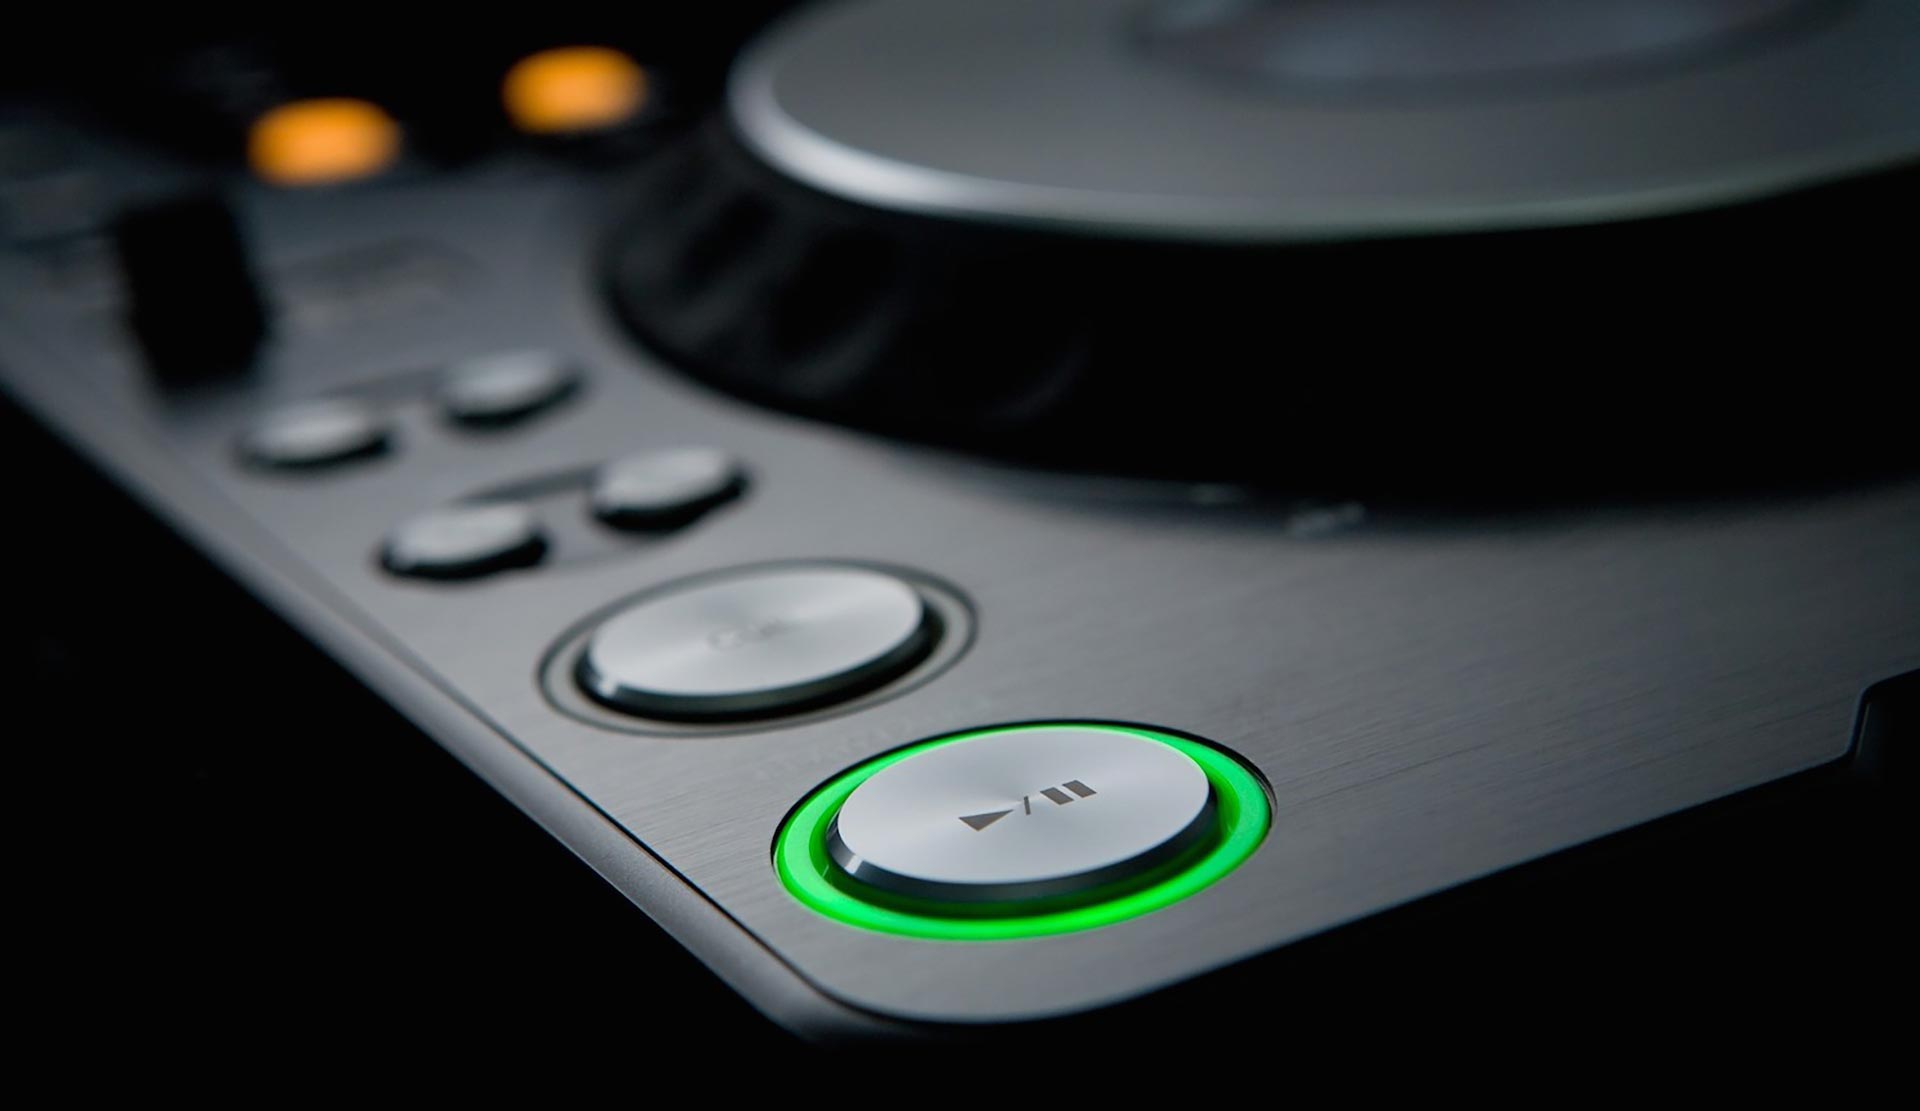 How To Use The Cue Button On A DJ Mixer